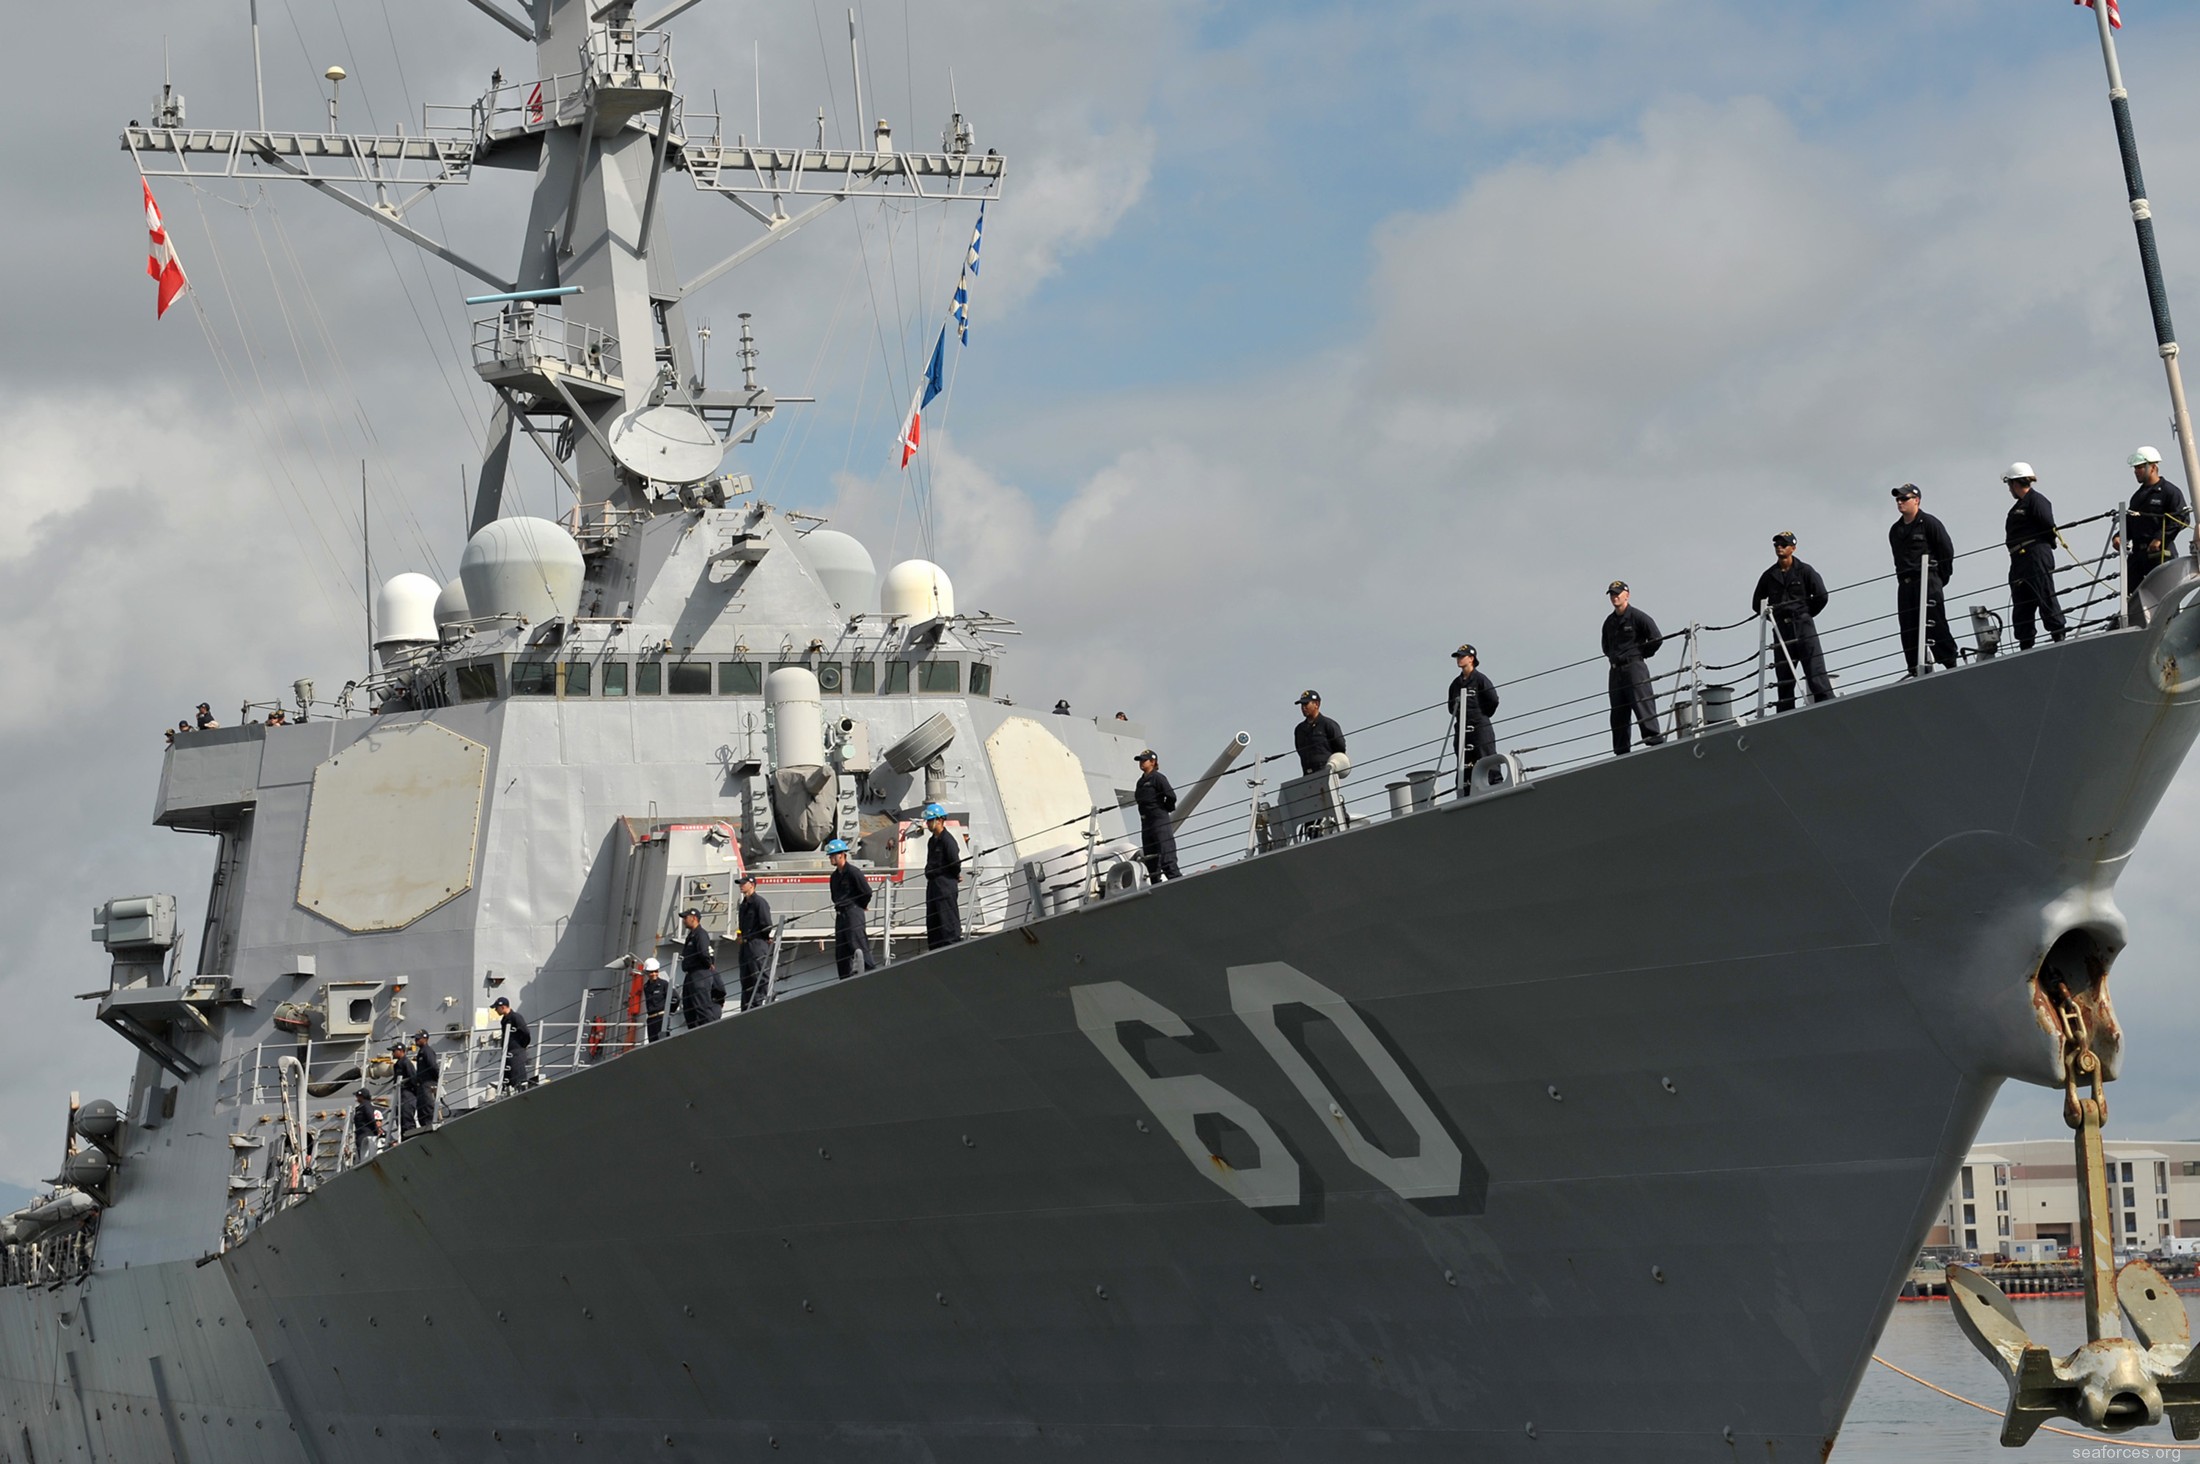 ddg-60 uss paul hamilton guided missile destroyer us navy 03 joint base pearl harbor hickam hawaii